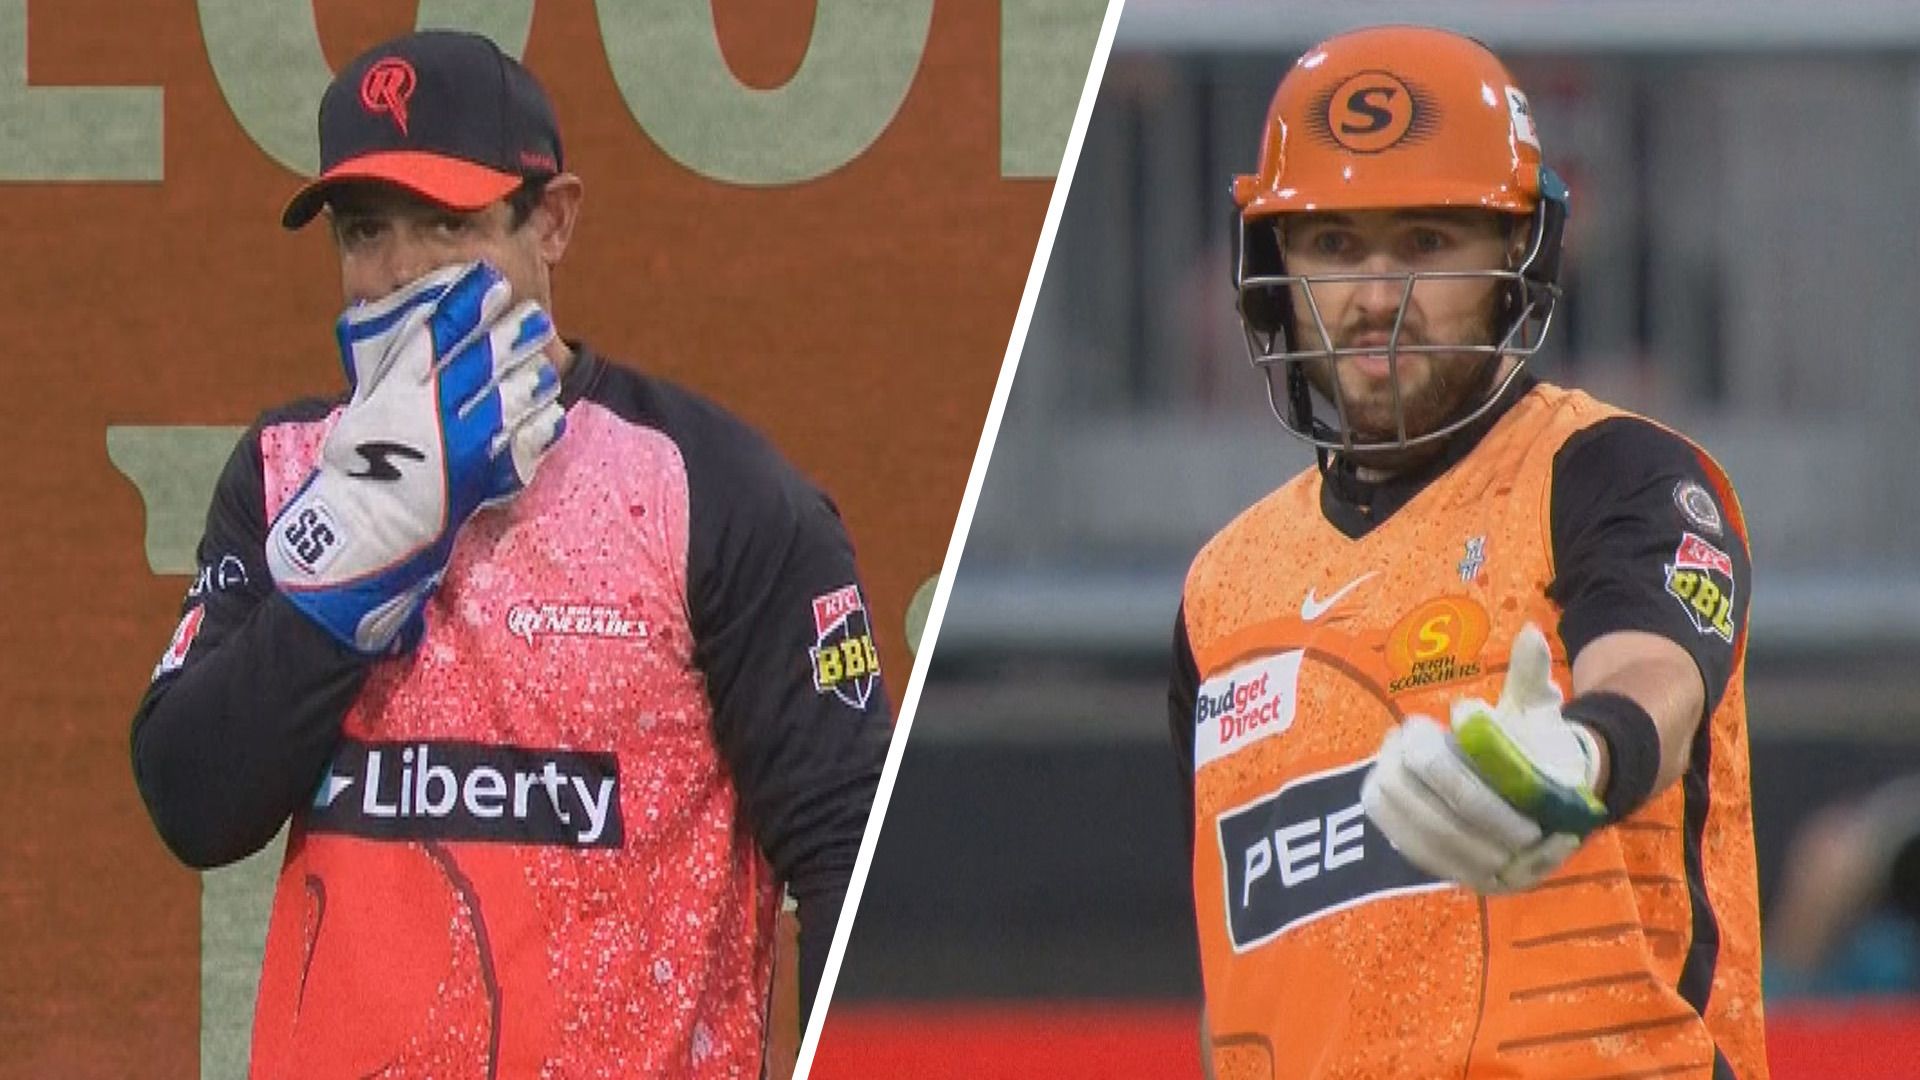 Quentin de Kock and Josh Inglis react after what would turn out to be the final ball of the BBL clash between the Renegades and Scorchers in Geelong.